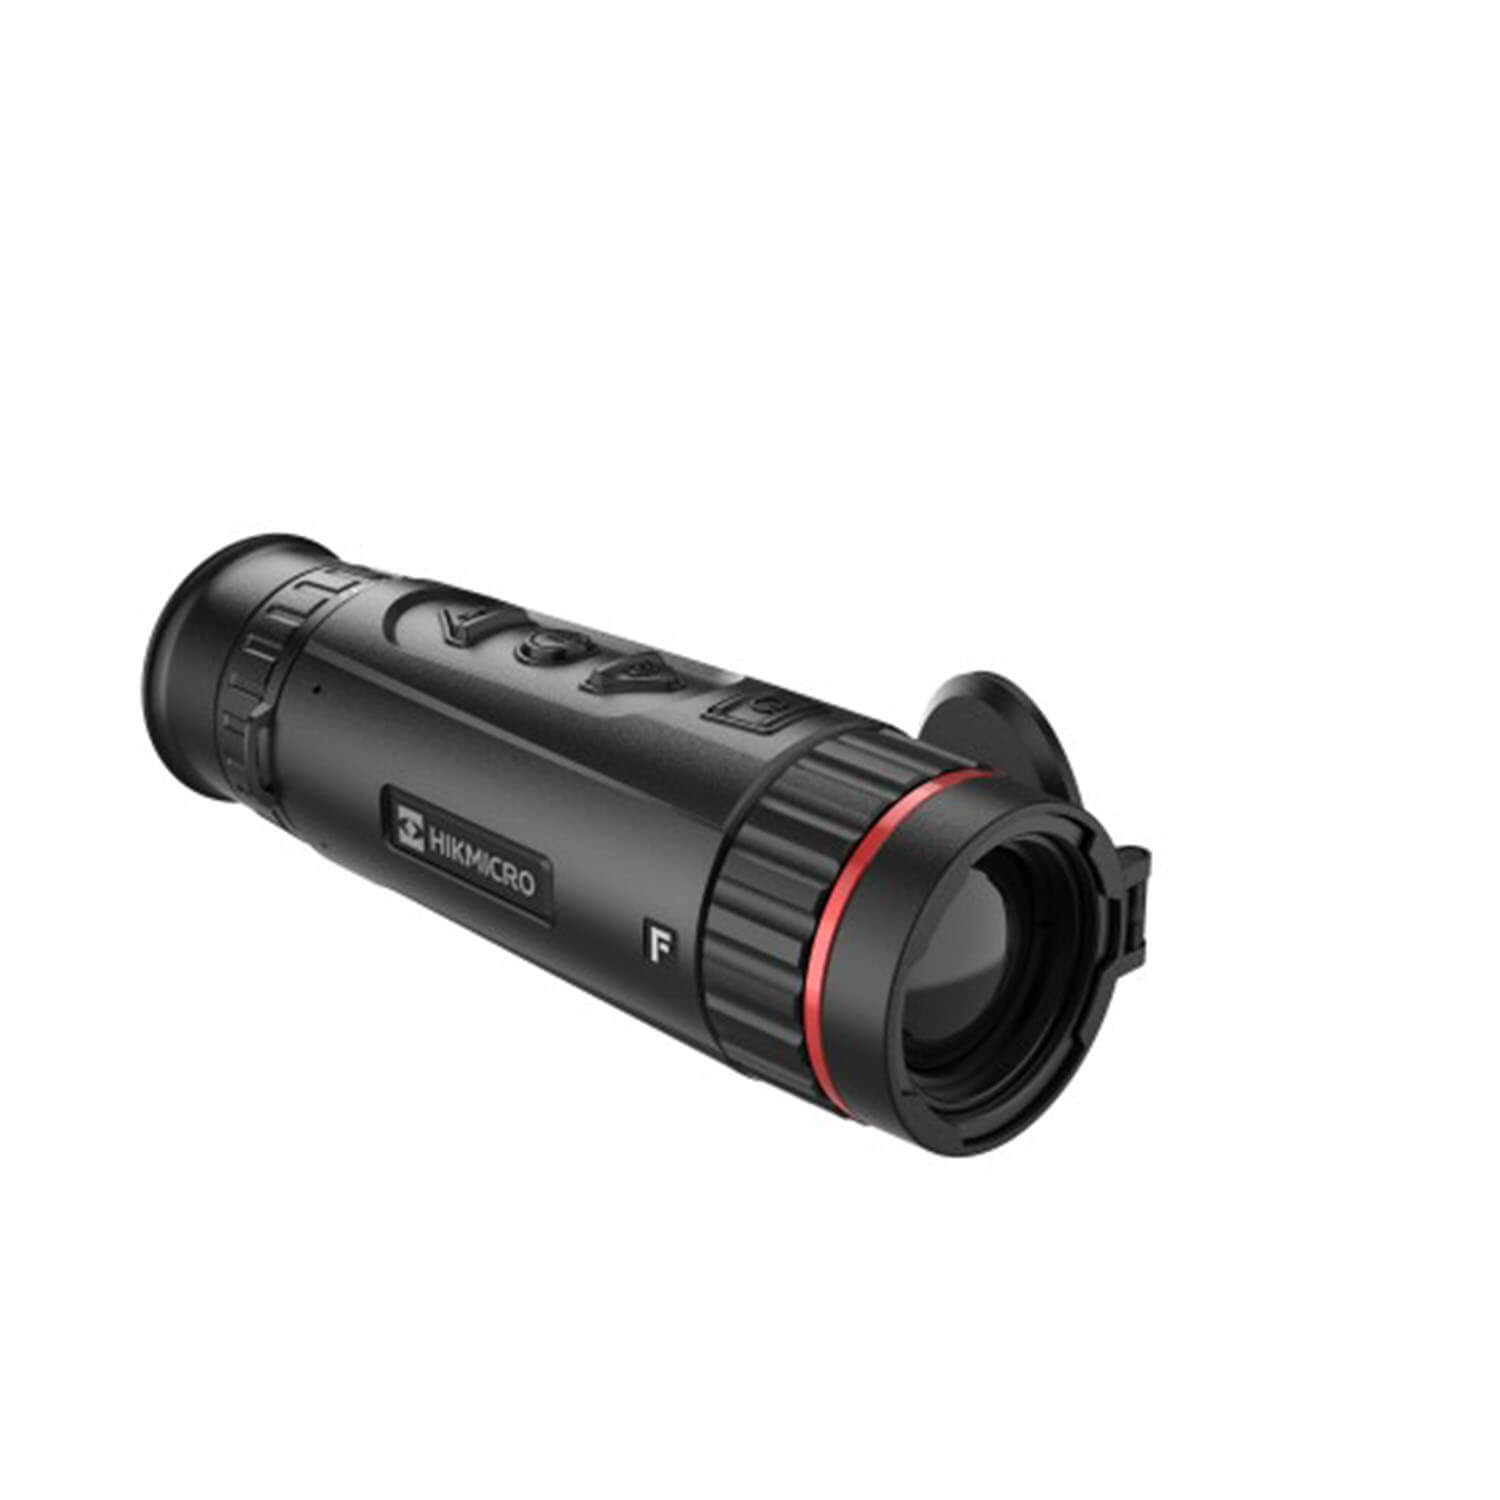 Hikmicro thermal imaging scope Falcon FH25 - Wild Boar Hunting